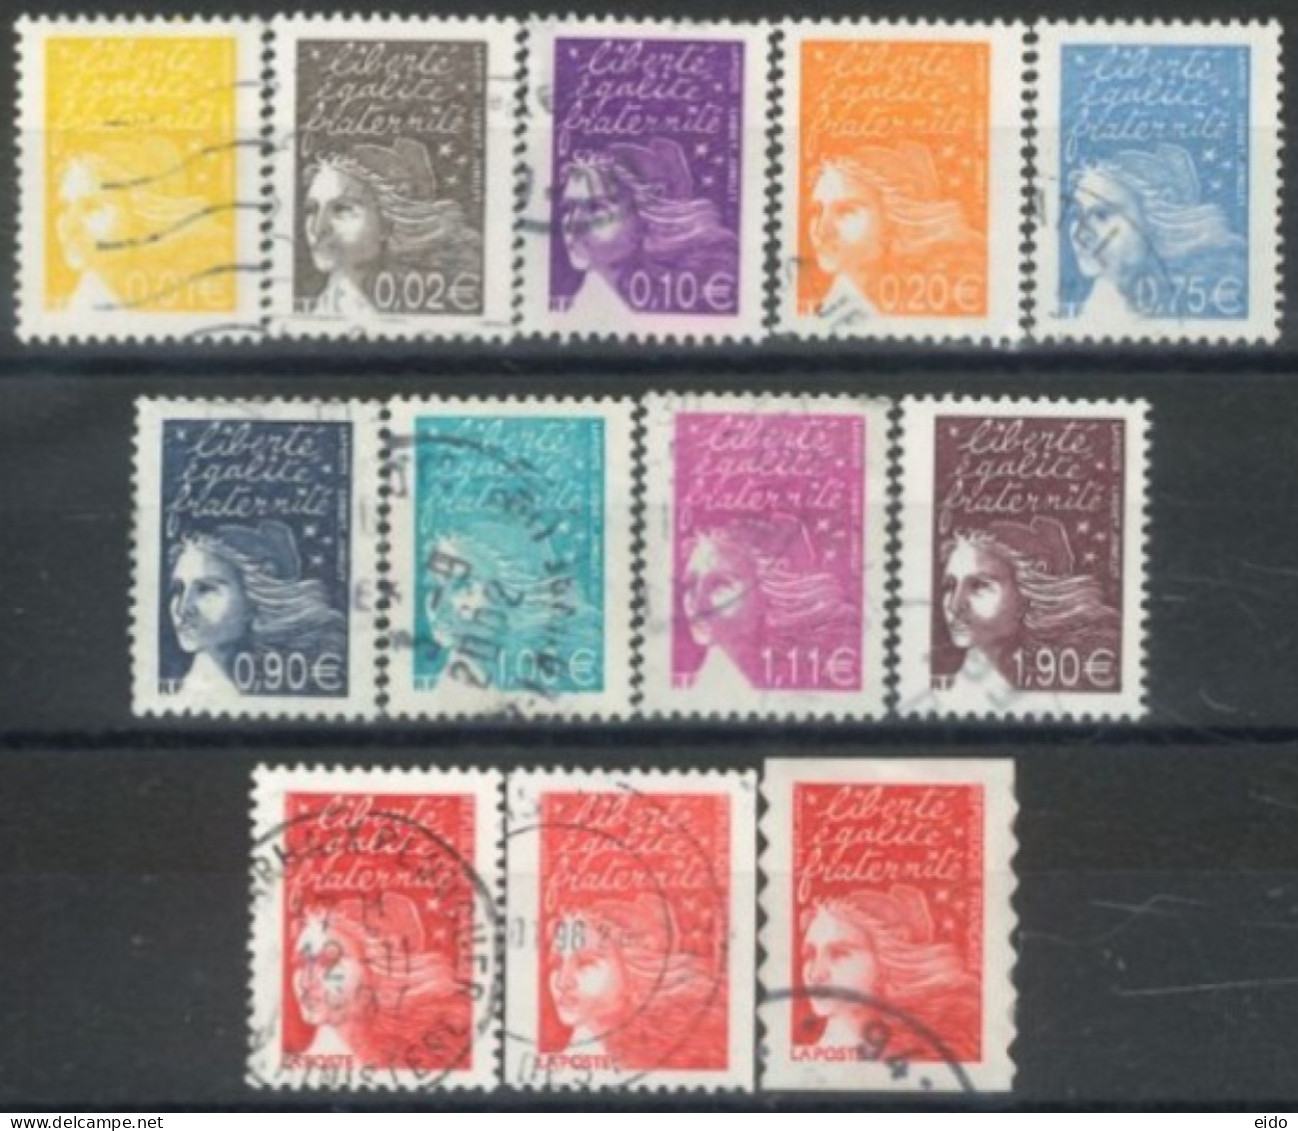 FRANCE - 2001/03 - MARIANNE STAMPS SET OF 12, USED - Gebraucht